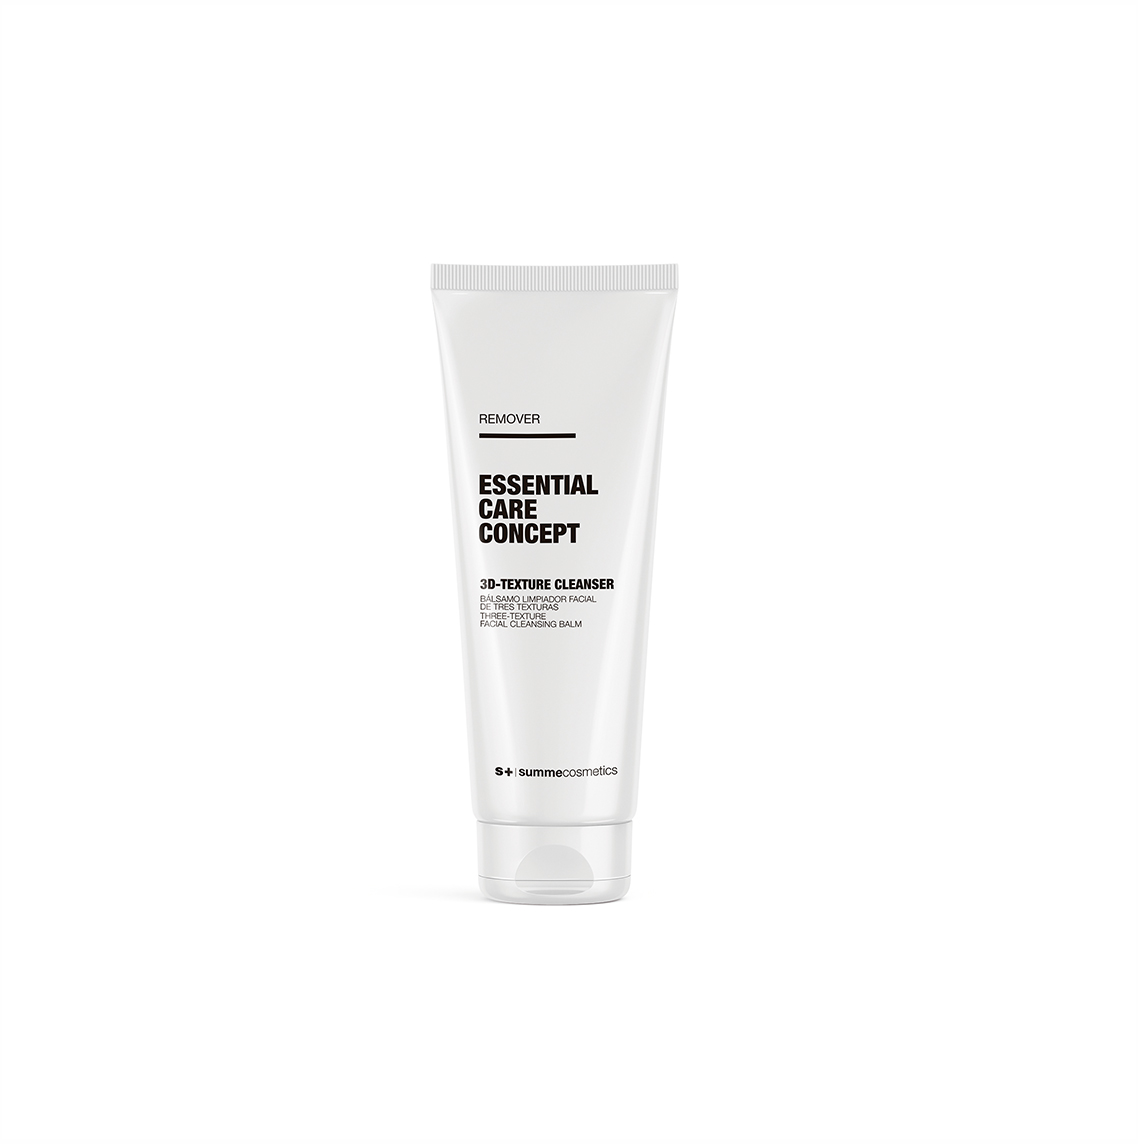 REMOVER 3D-TEXTURE CLEANSER